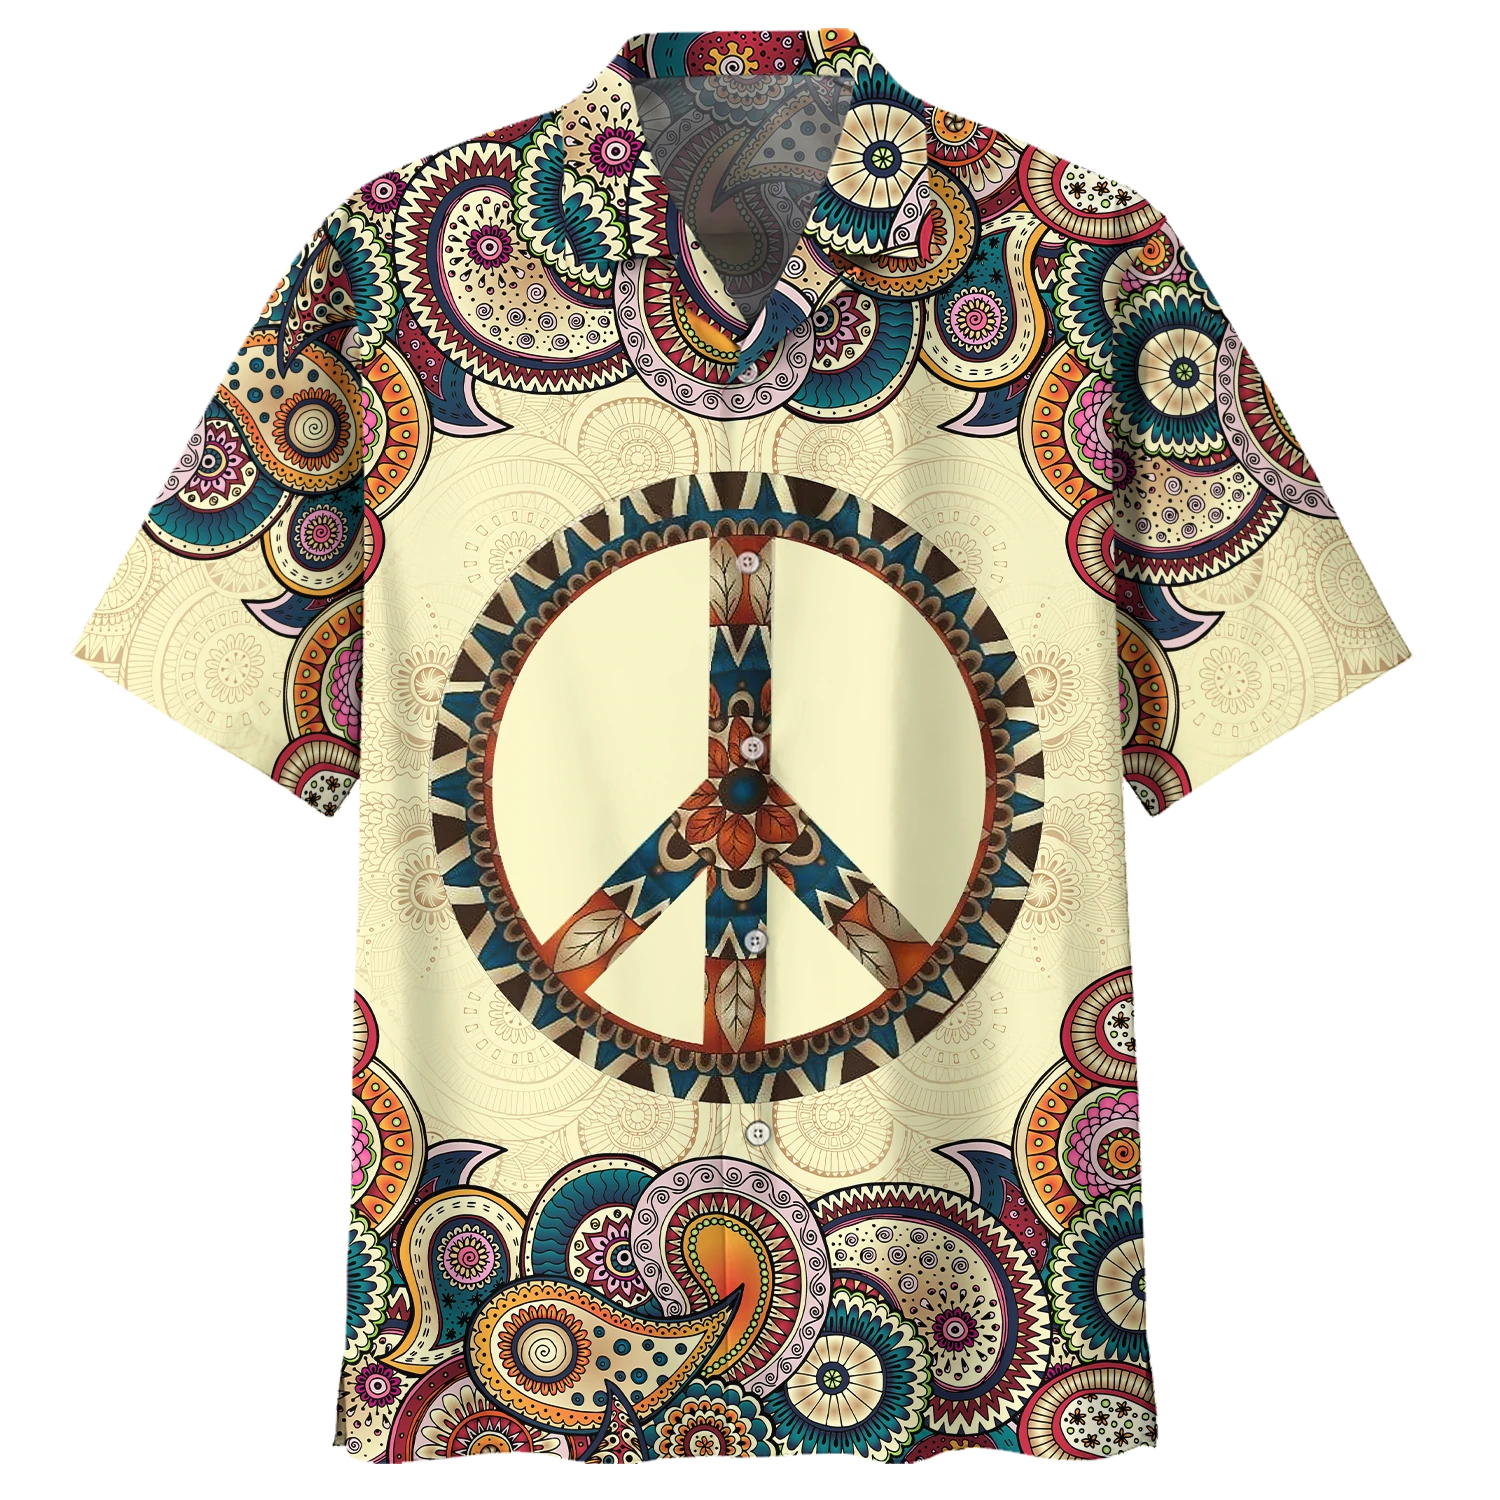 Imagine All The People Living In Peace- Peace Sign- American Flag- Hippie Hawaiian Shirt